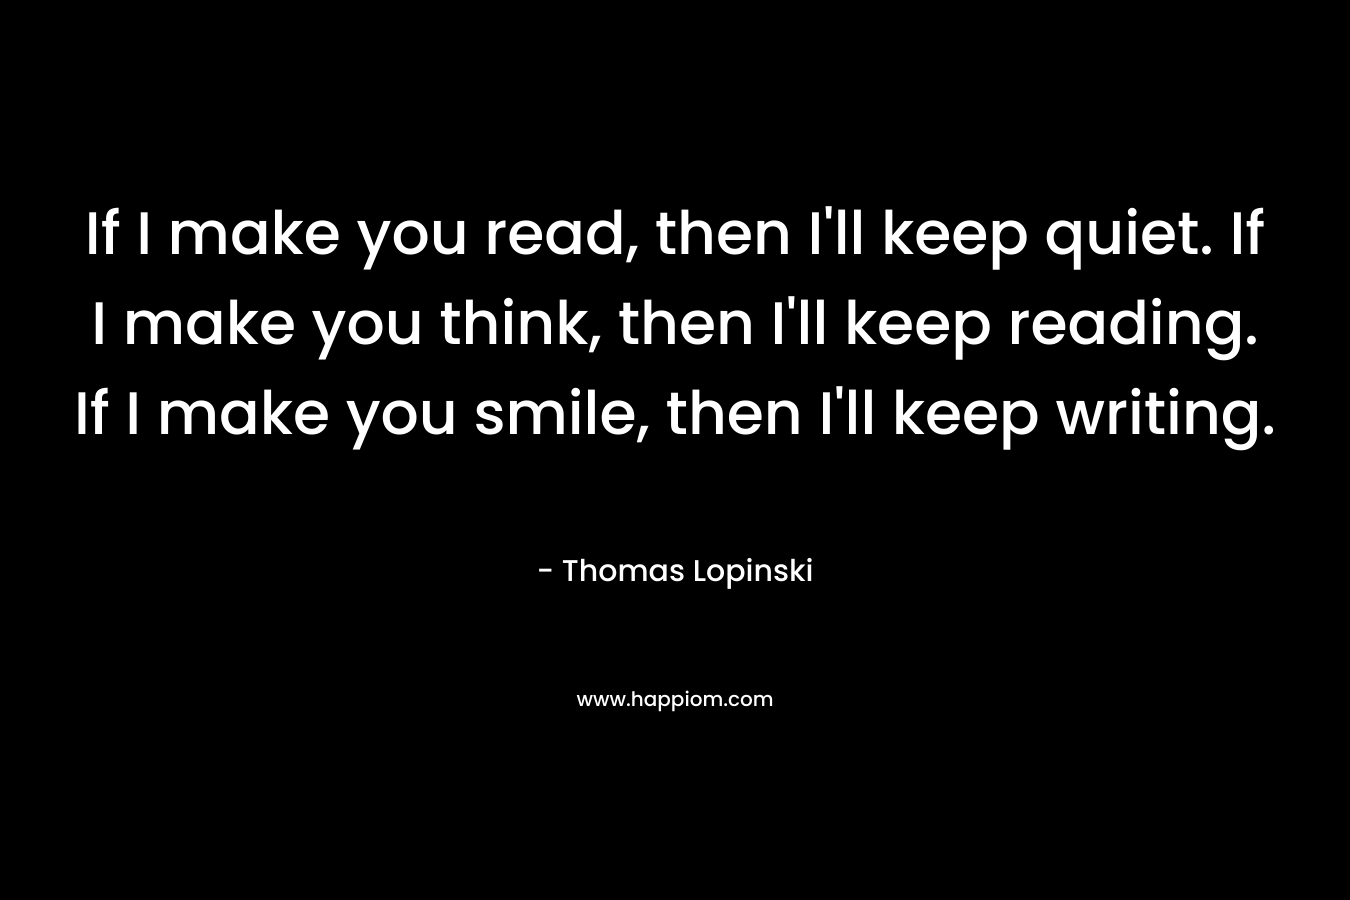 If I make you read, then I’ll keep quiet. If I make you think, then I’ll keep reading. If I make you smile, then I’ll keep writing. – Thomas Lopinski